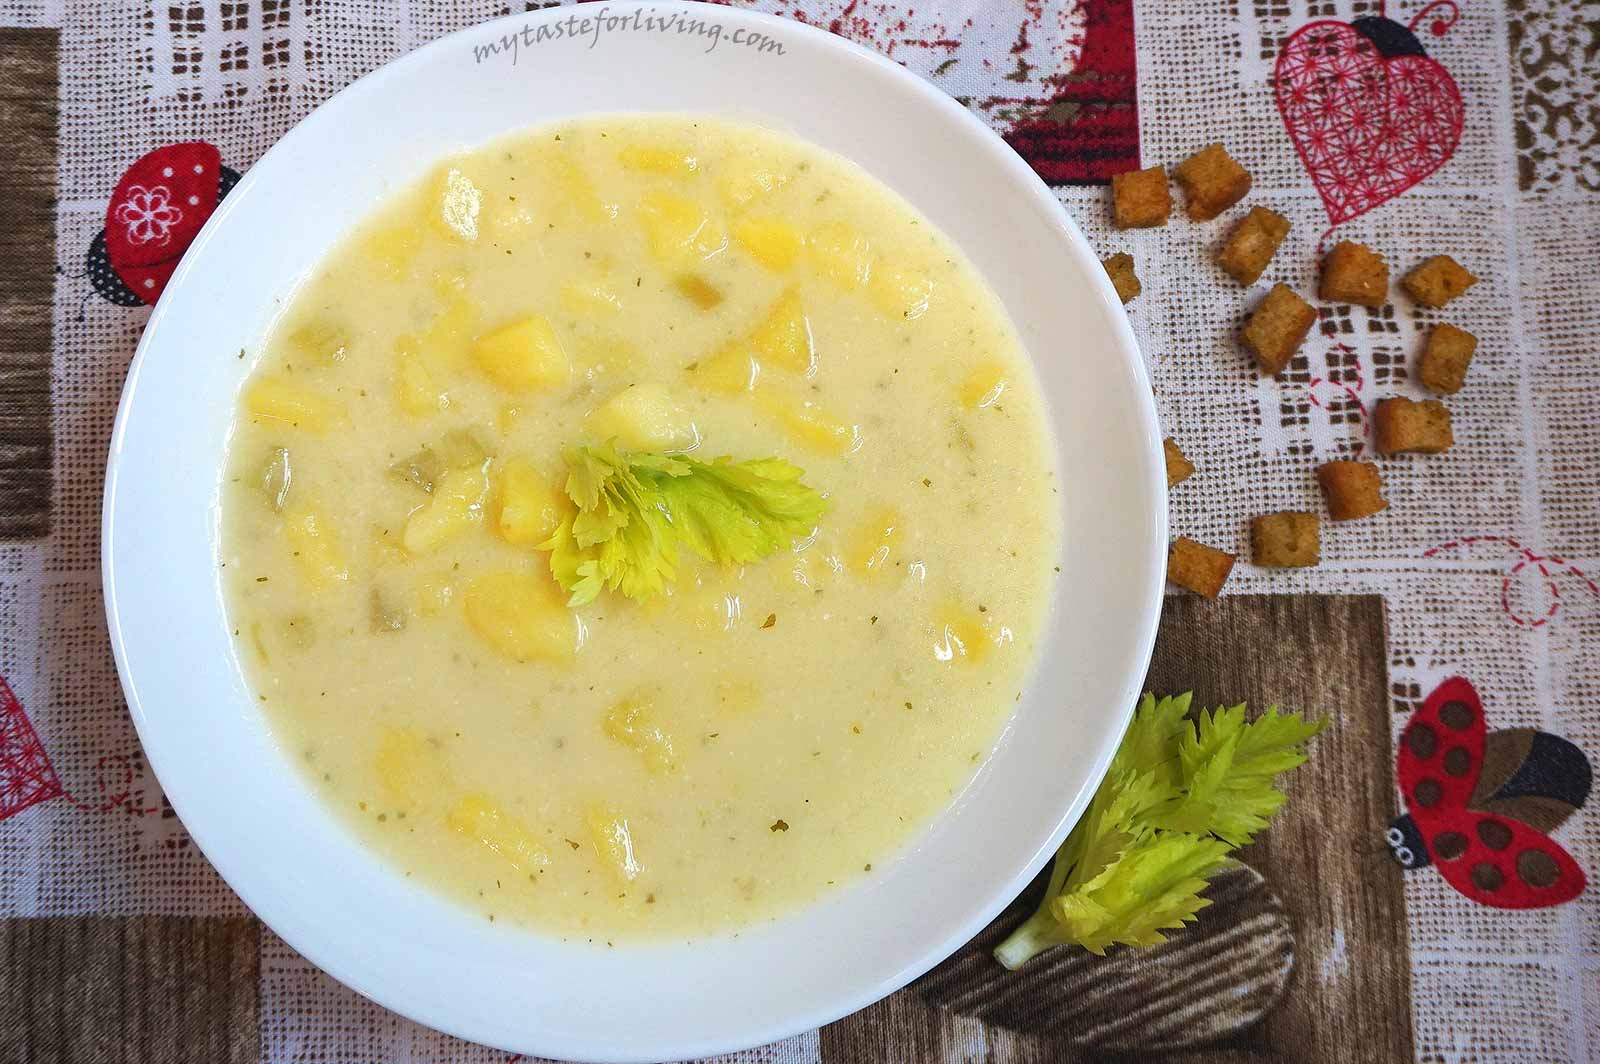 At home we love everything made with potatoes. This creamy potato soup with parmesan, sour cream, celery, onion and garlic is also one of our favorites recipes. The secret of its creamy structure is that part of it is mashed. 